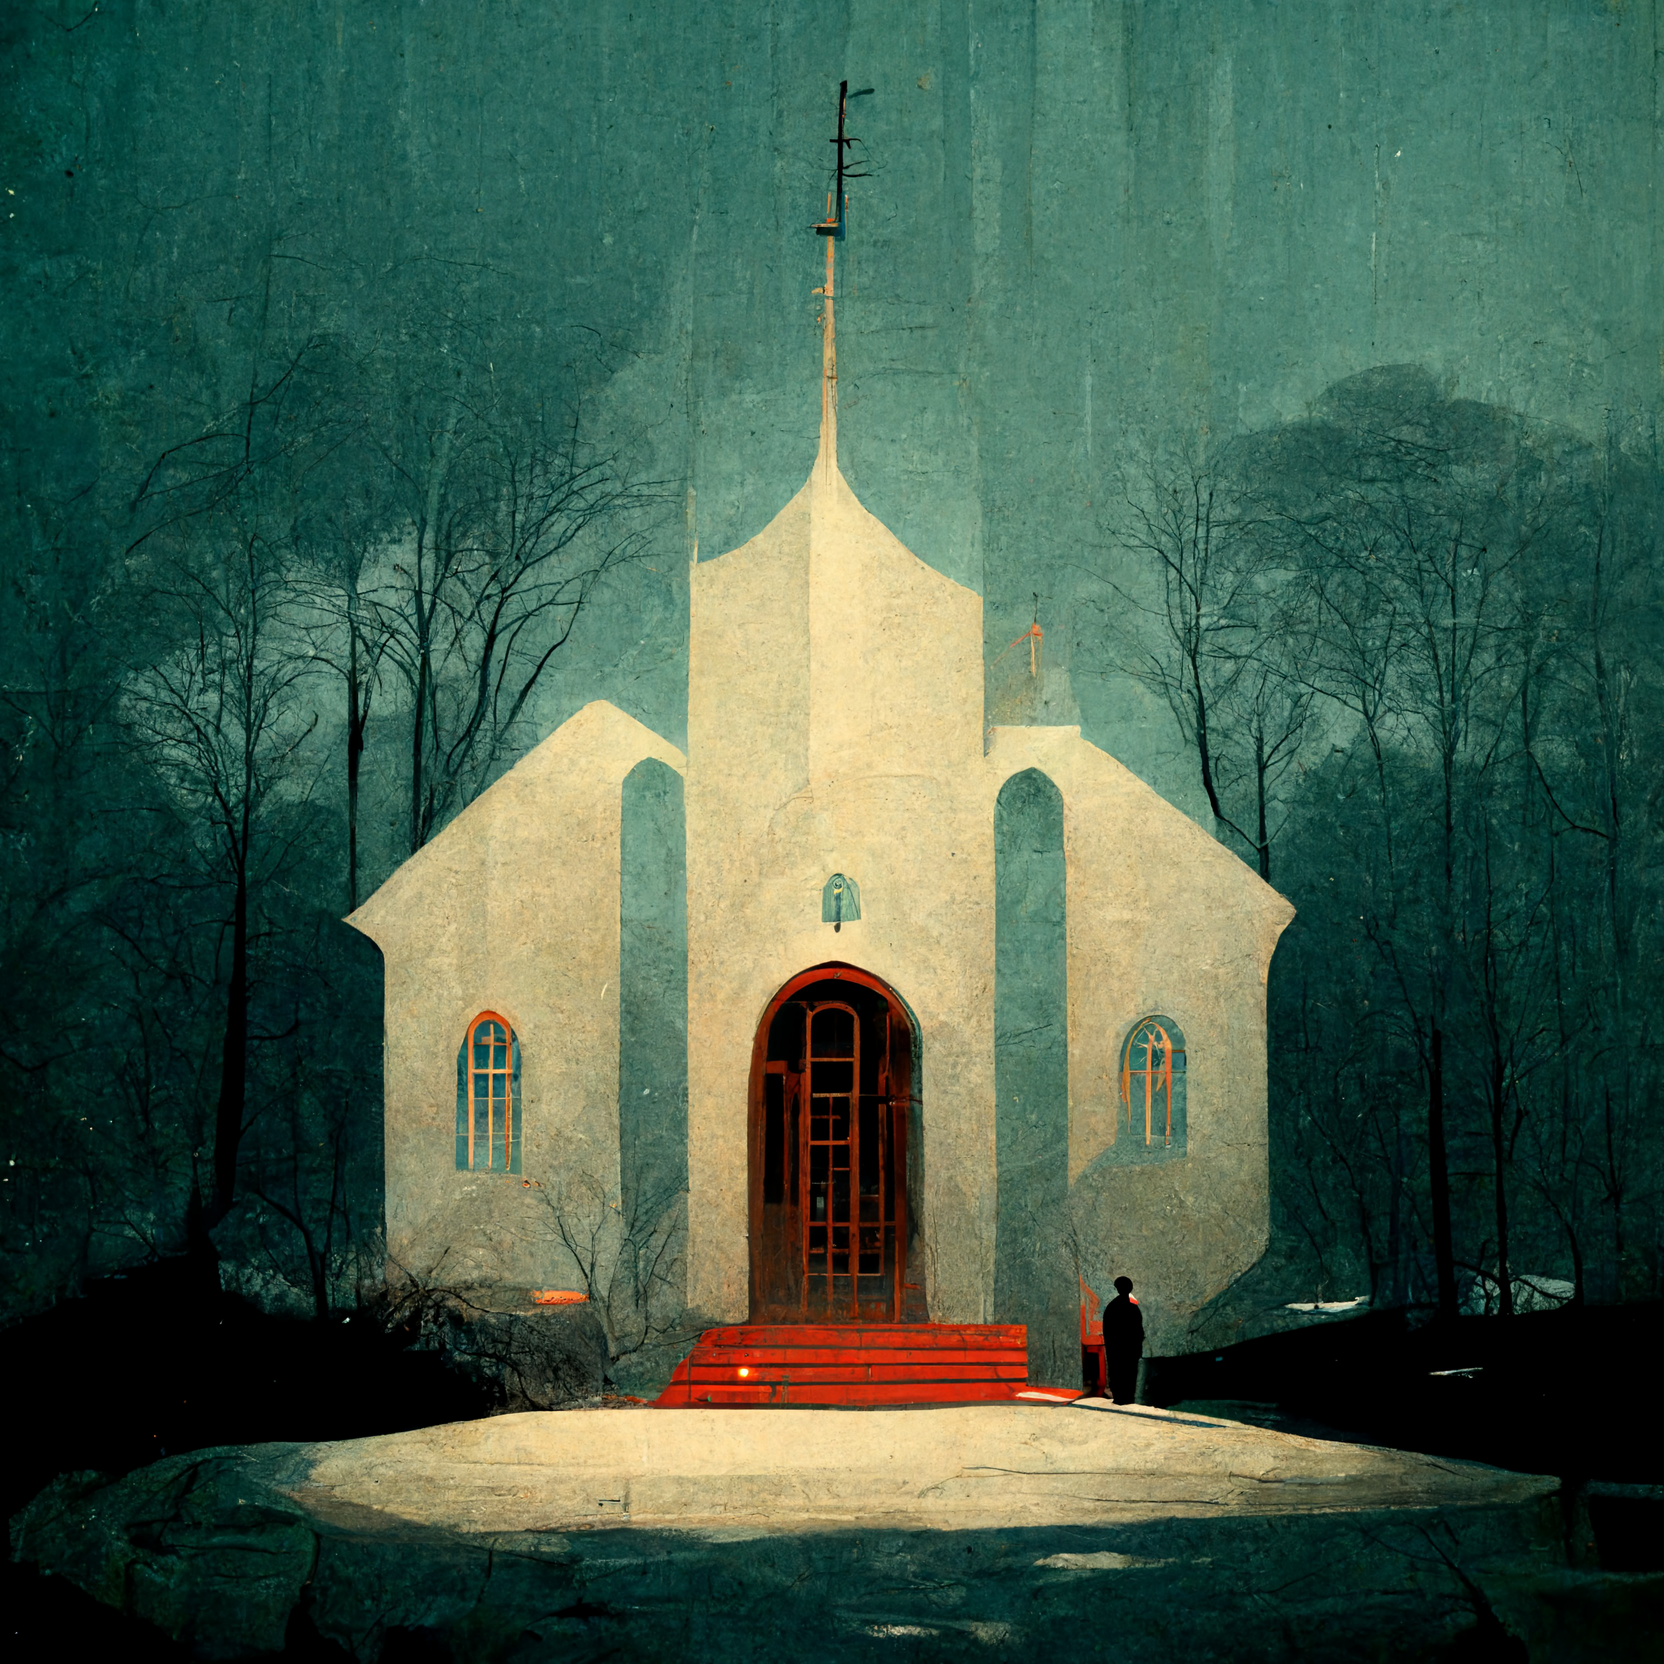 AND SO THE CHAPEL SPOKE by Luis Dato